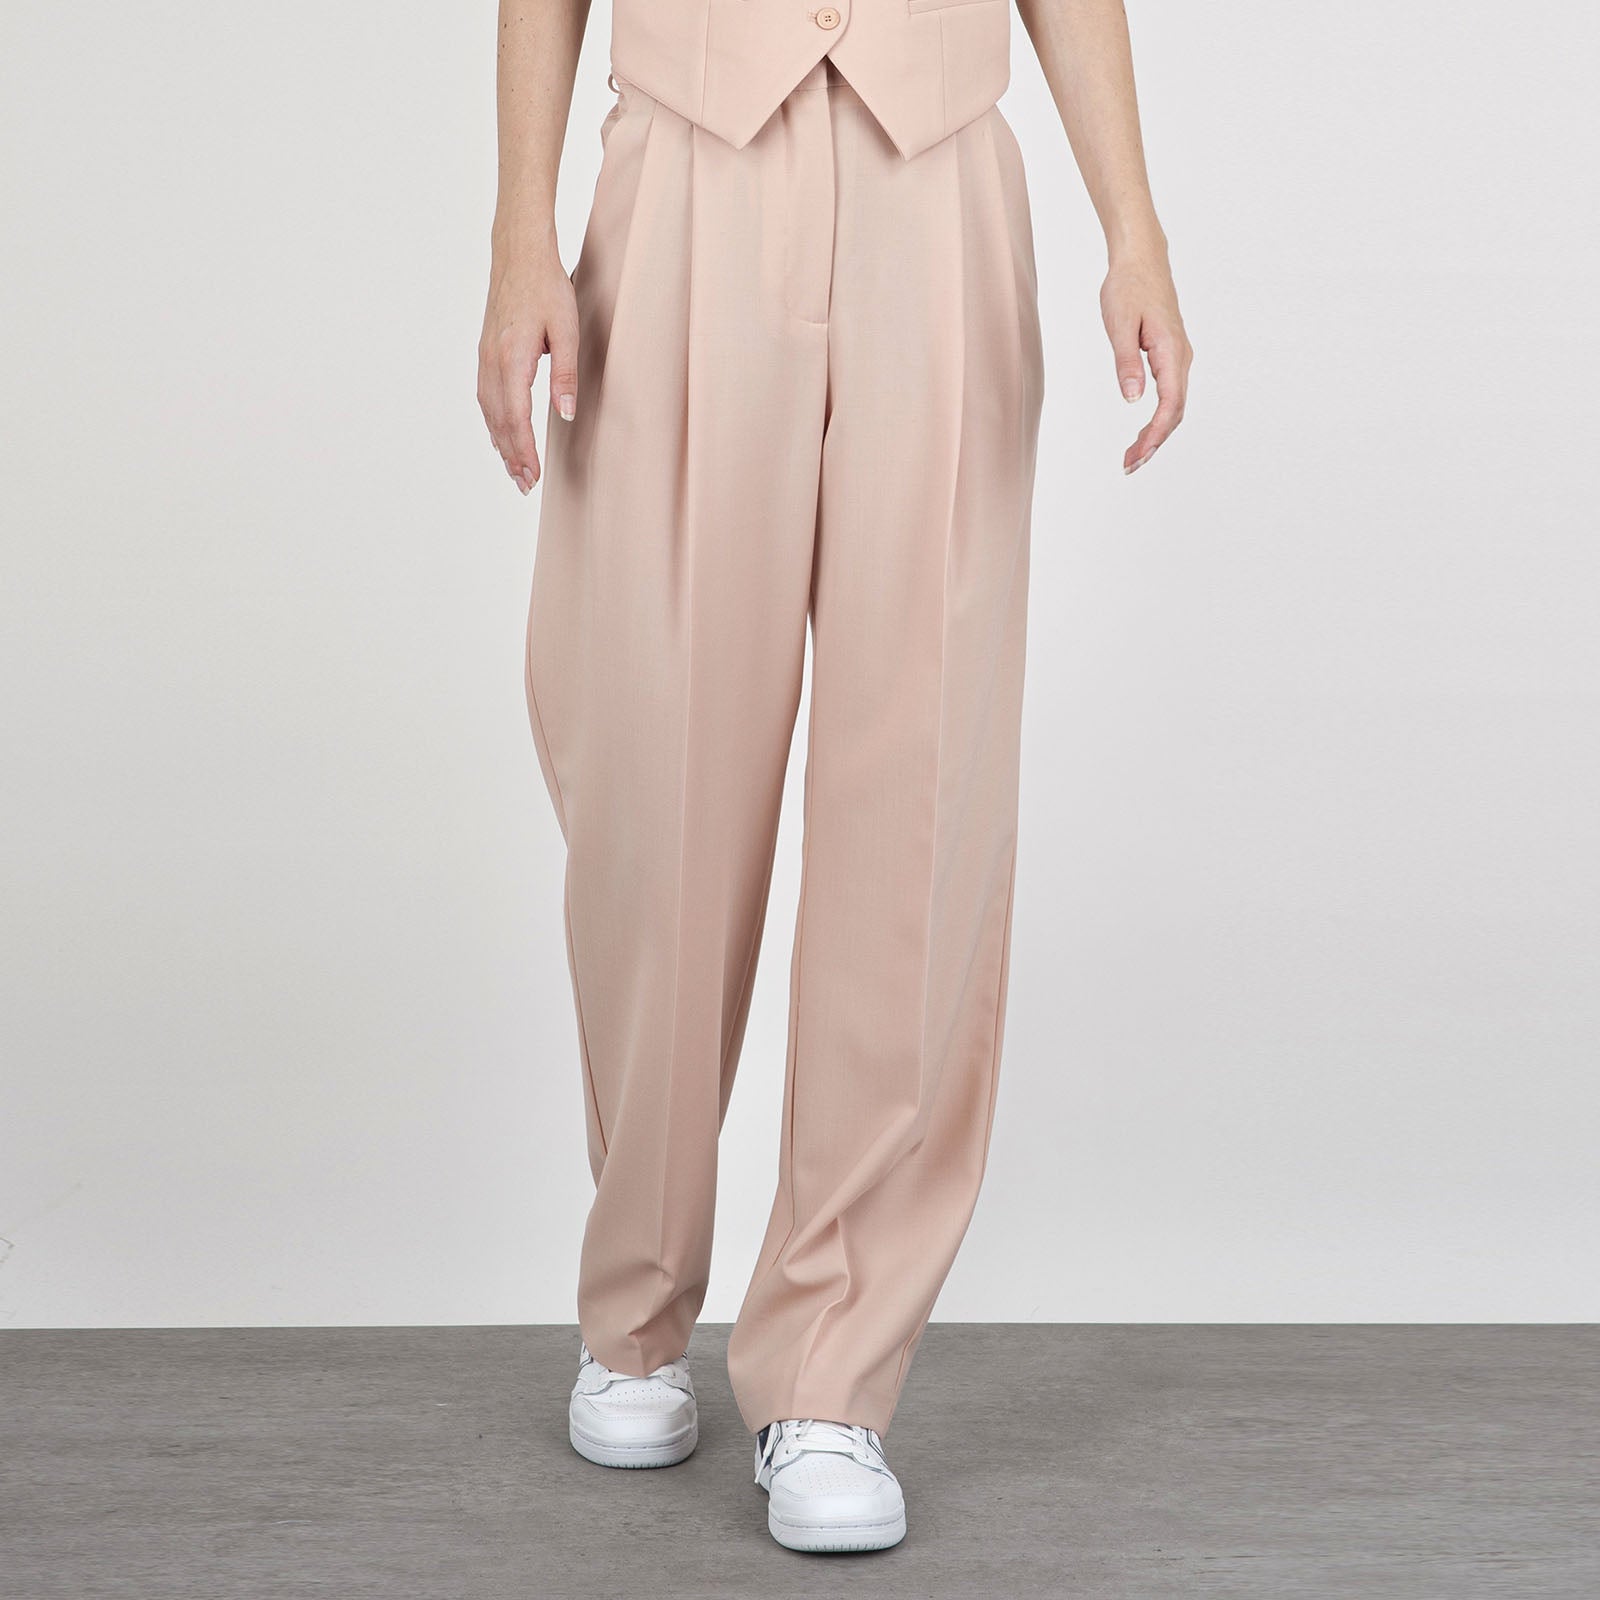 Semicouture Jody Synthetic Powder Pink Trousers - 8